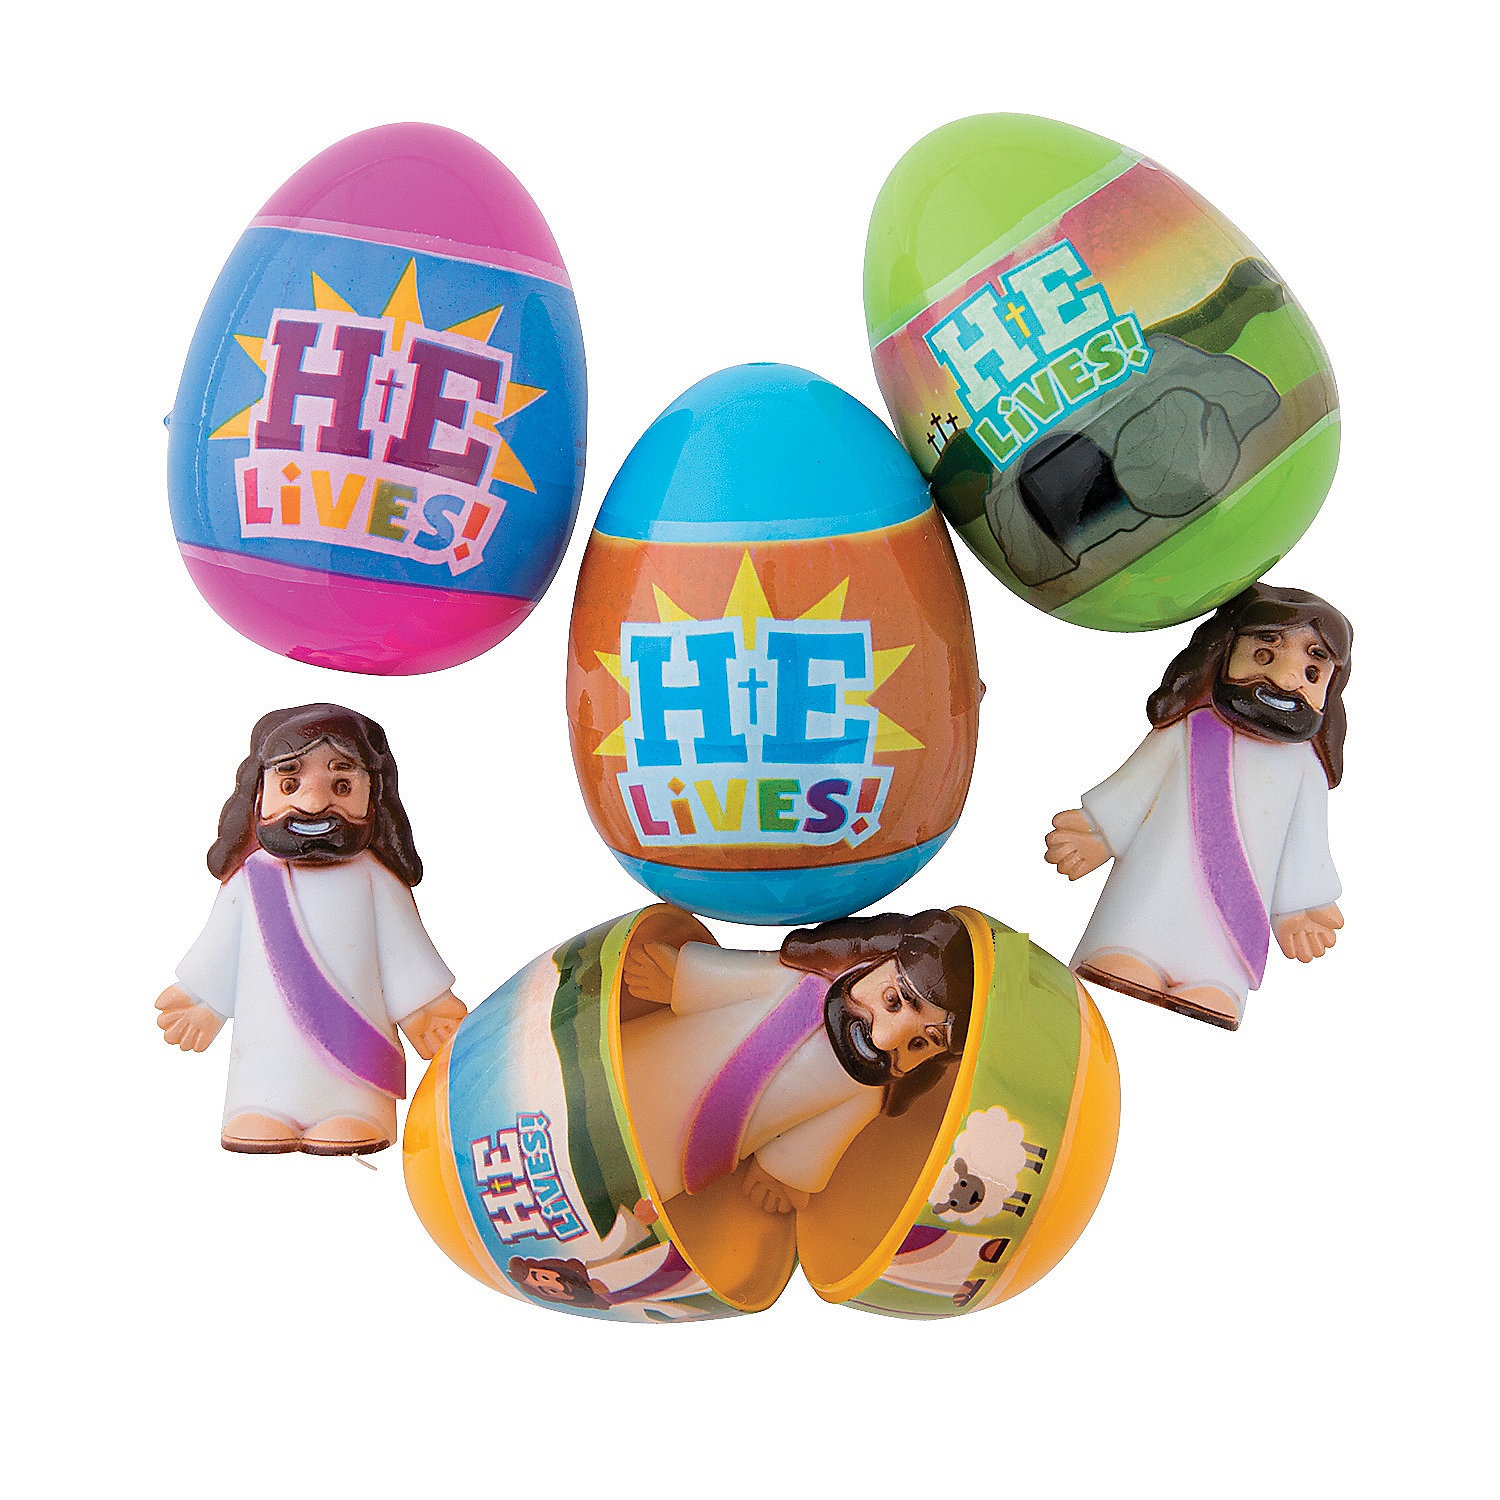 2-1-2-he-lives-toy-filled-plastic-easter-eggs-12-pc-_13720277